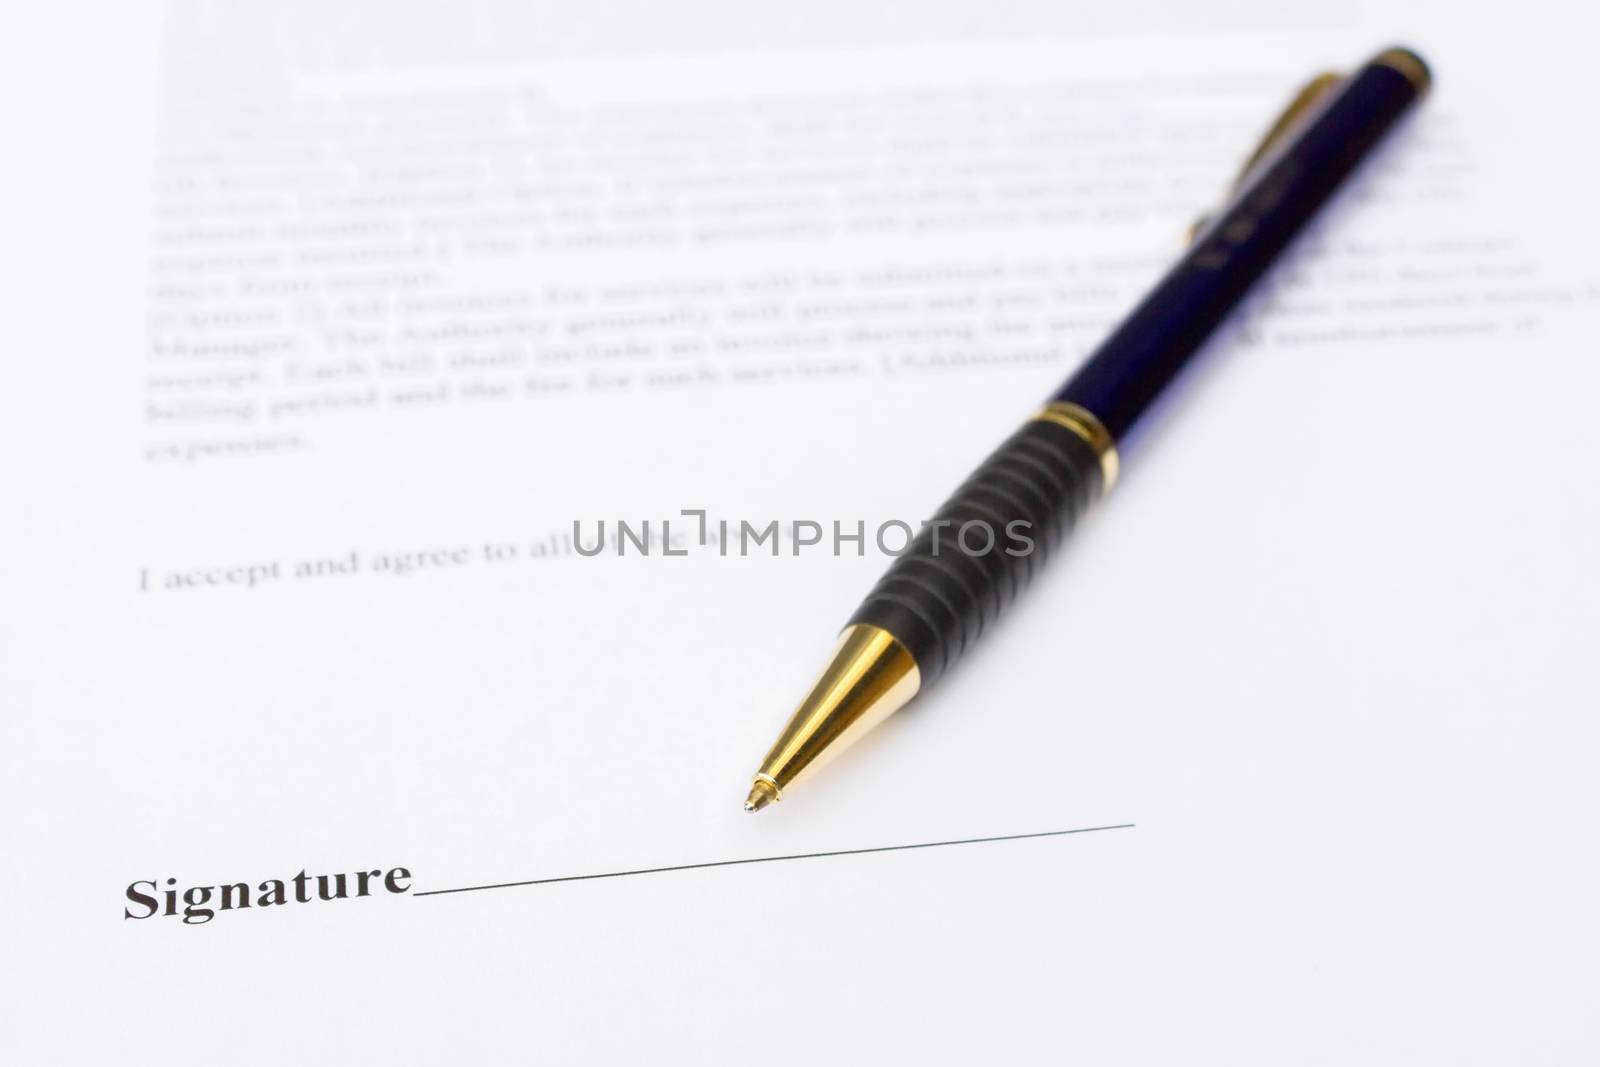 Pen for signature lying on white contract paper